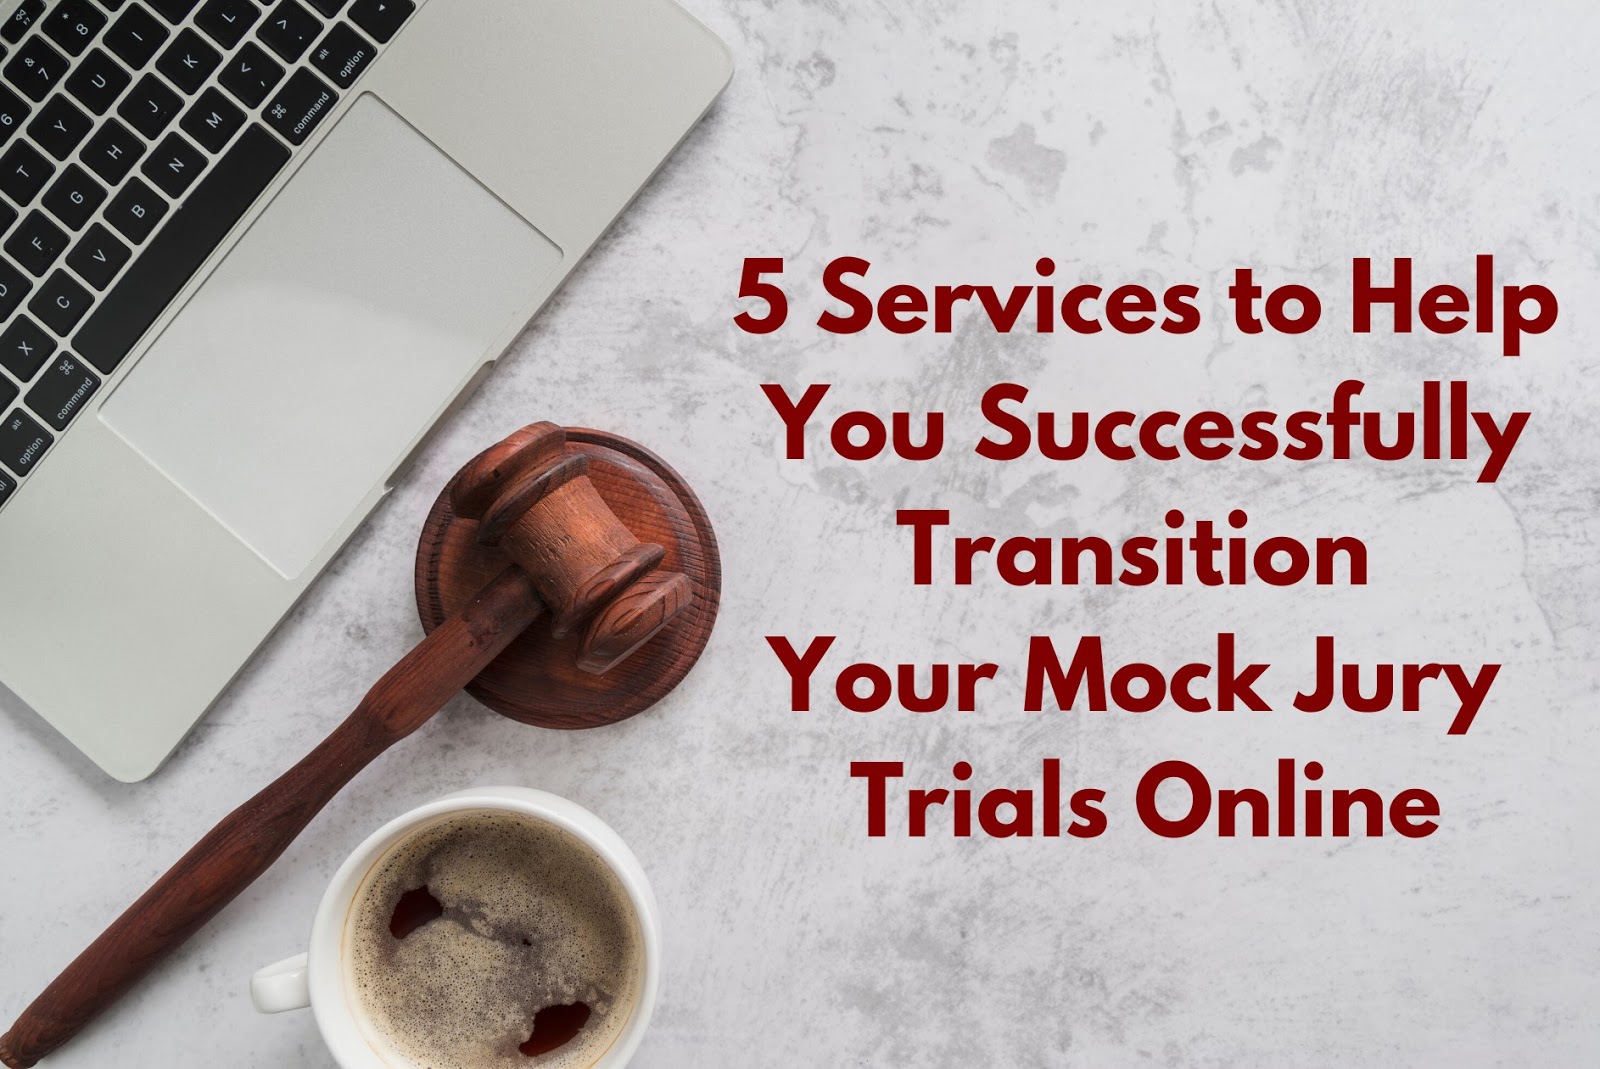 5 Services to Help You Successfully Transition Your Mock Jury Trials Online